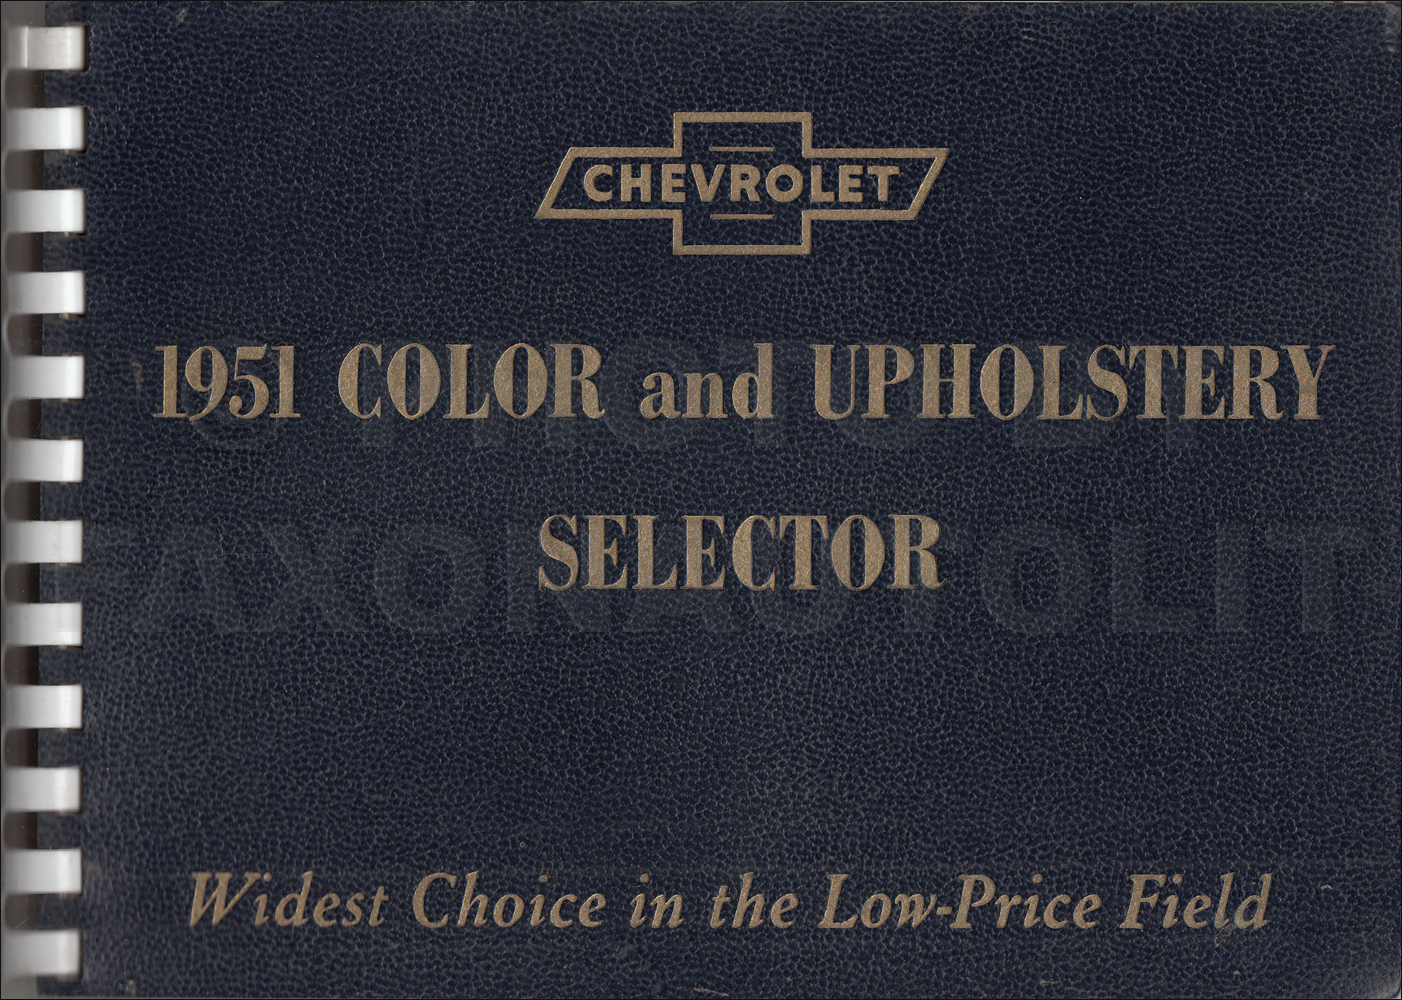 1951 Chevrolet Car Color and Upholstery Album